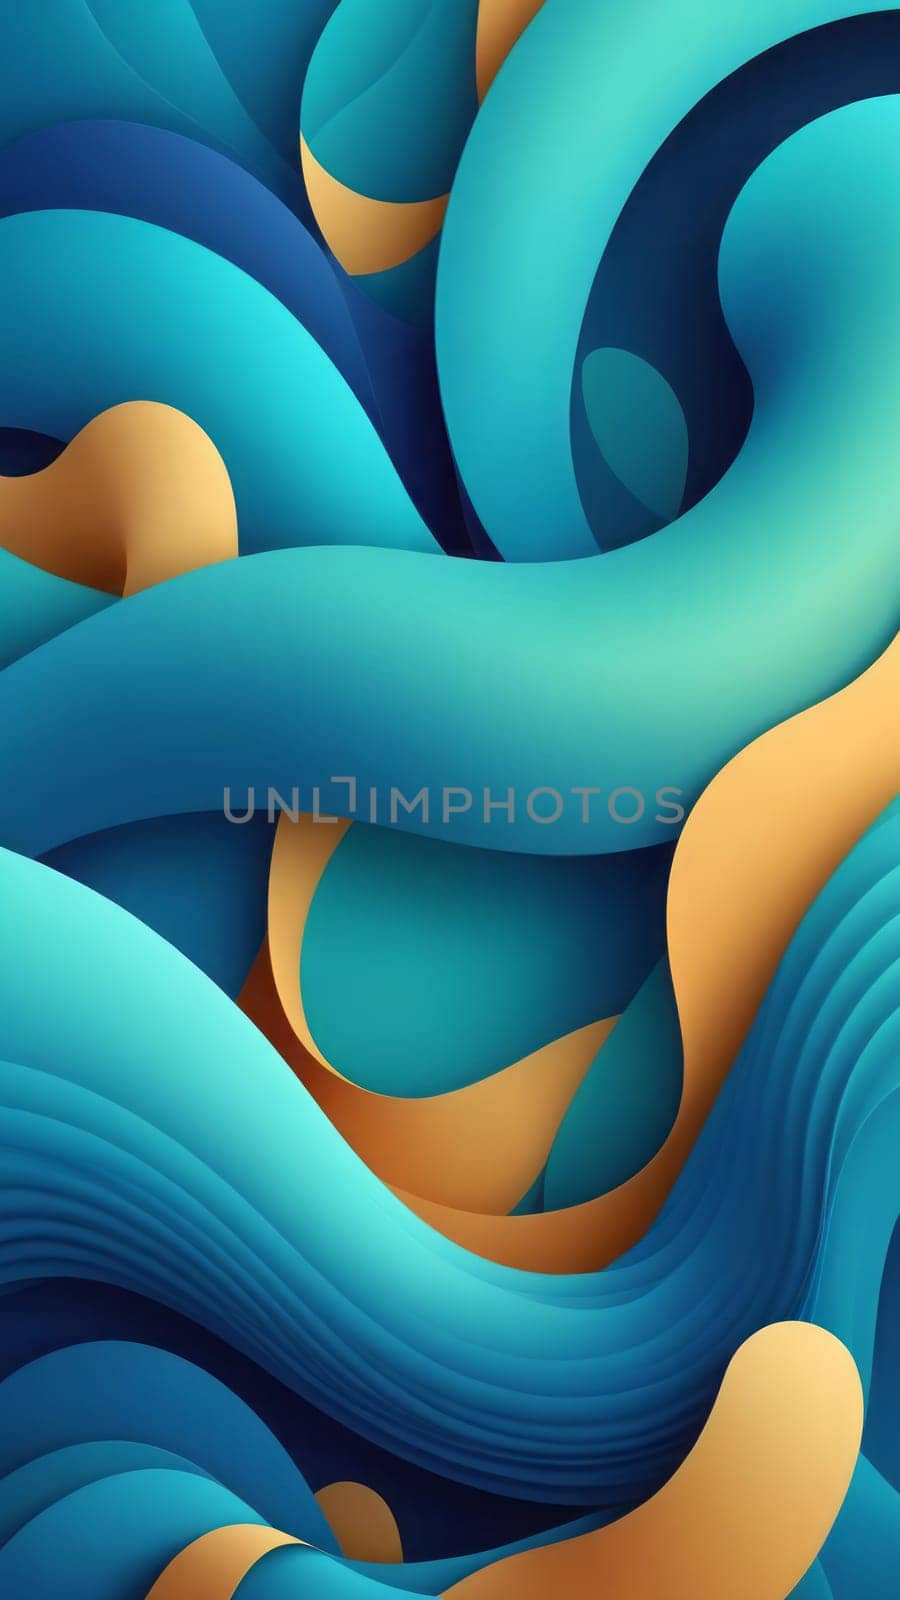 Art for inspiration from Organic shapes and aqua by nkotlyar